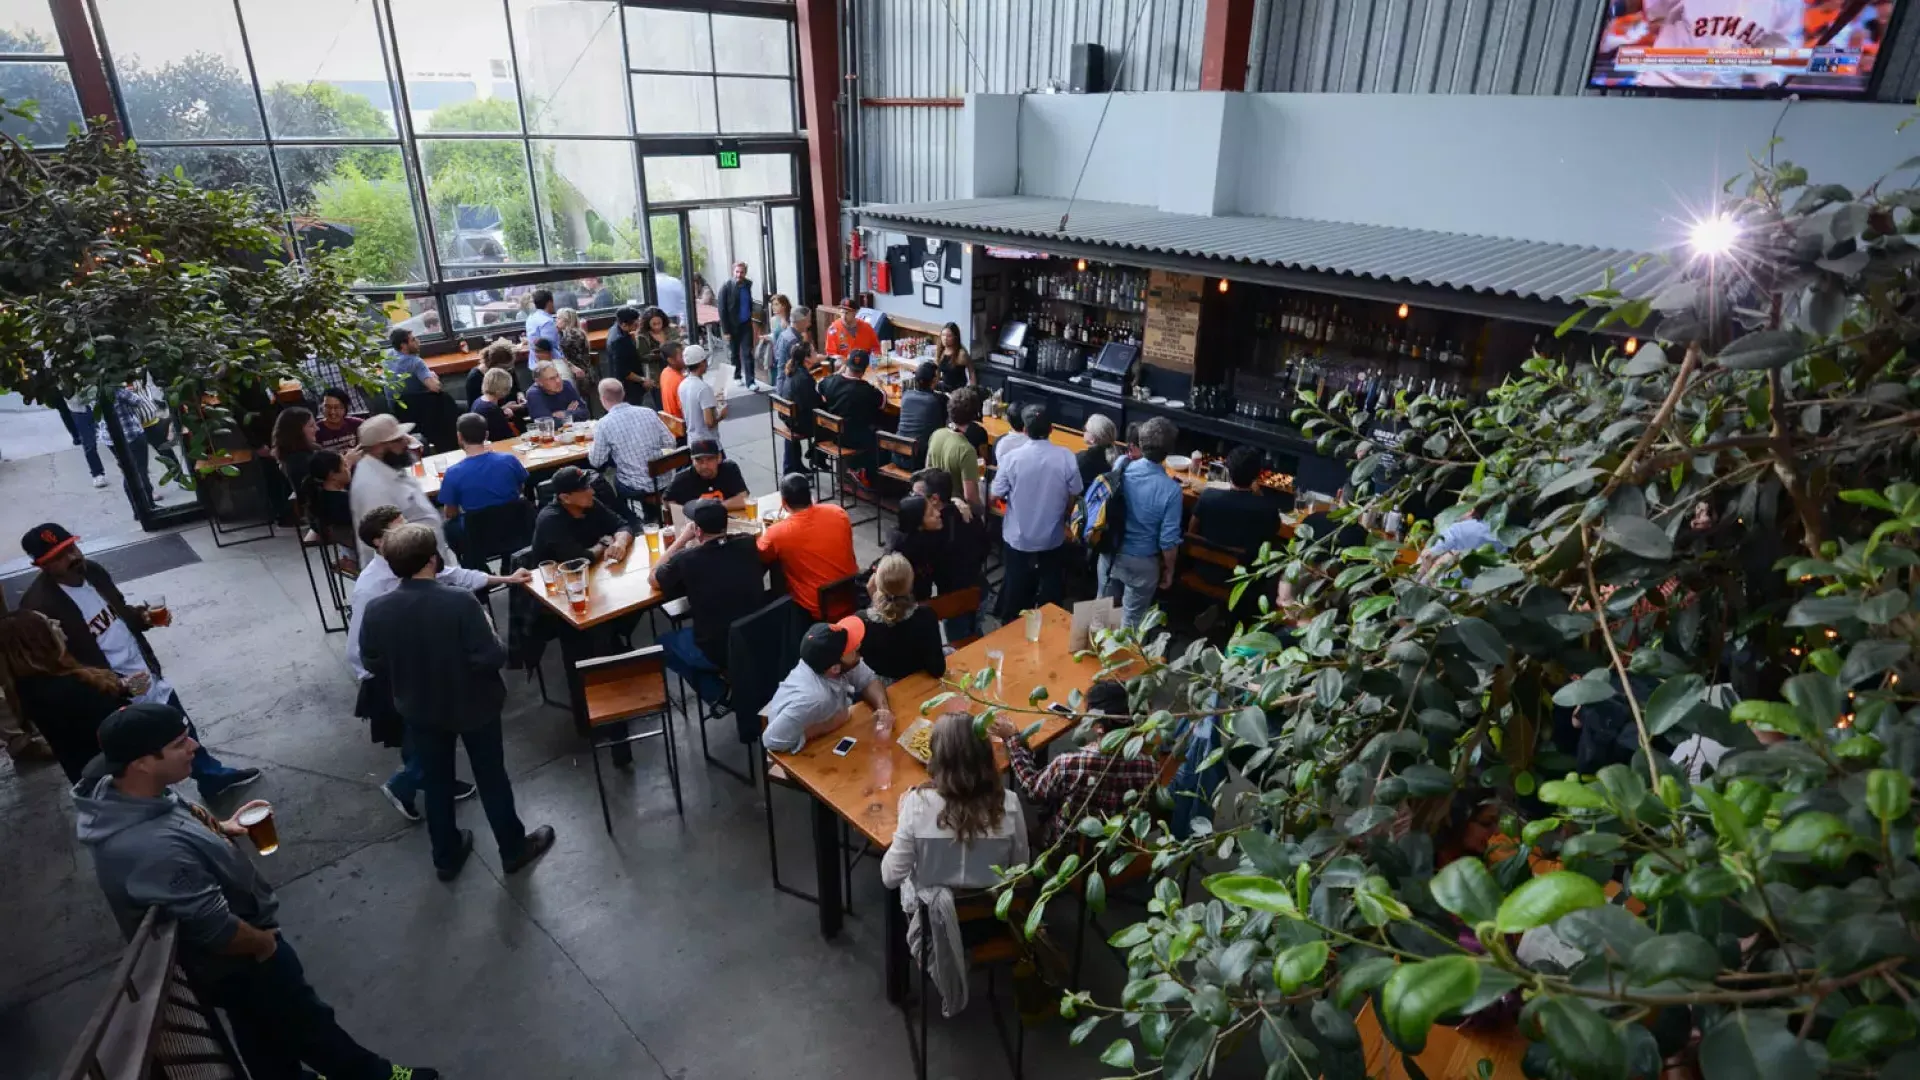 Patrons eat and drink at Southern Pacific Brewing in San Francisco.